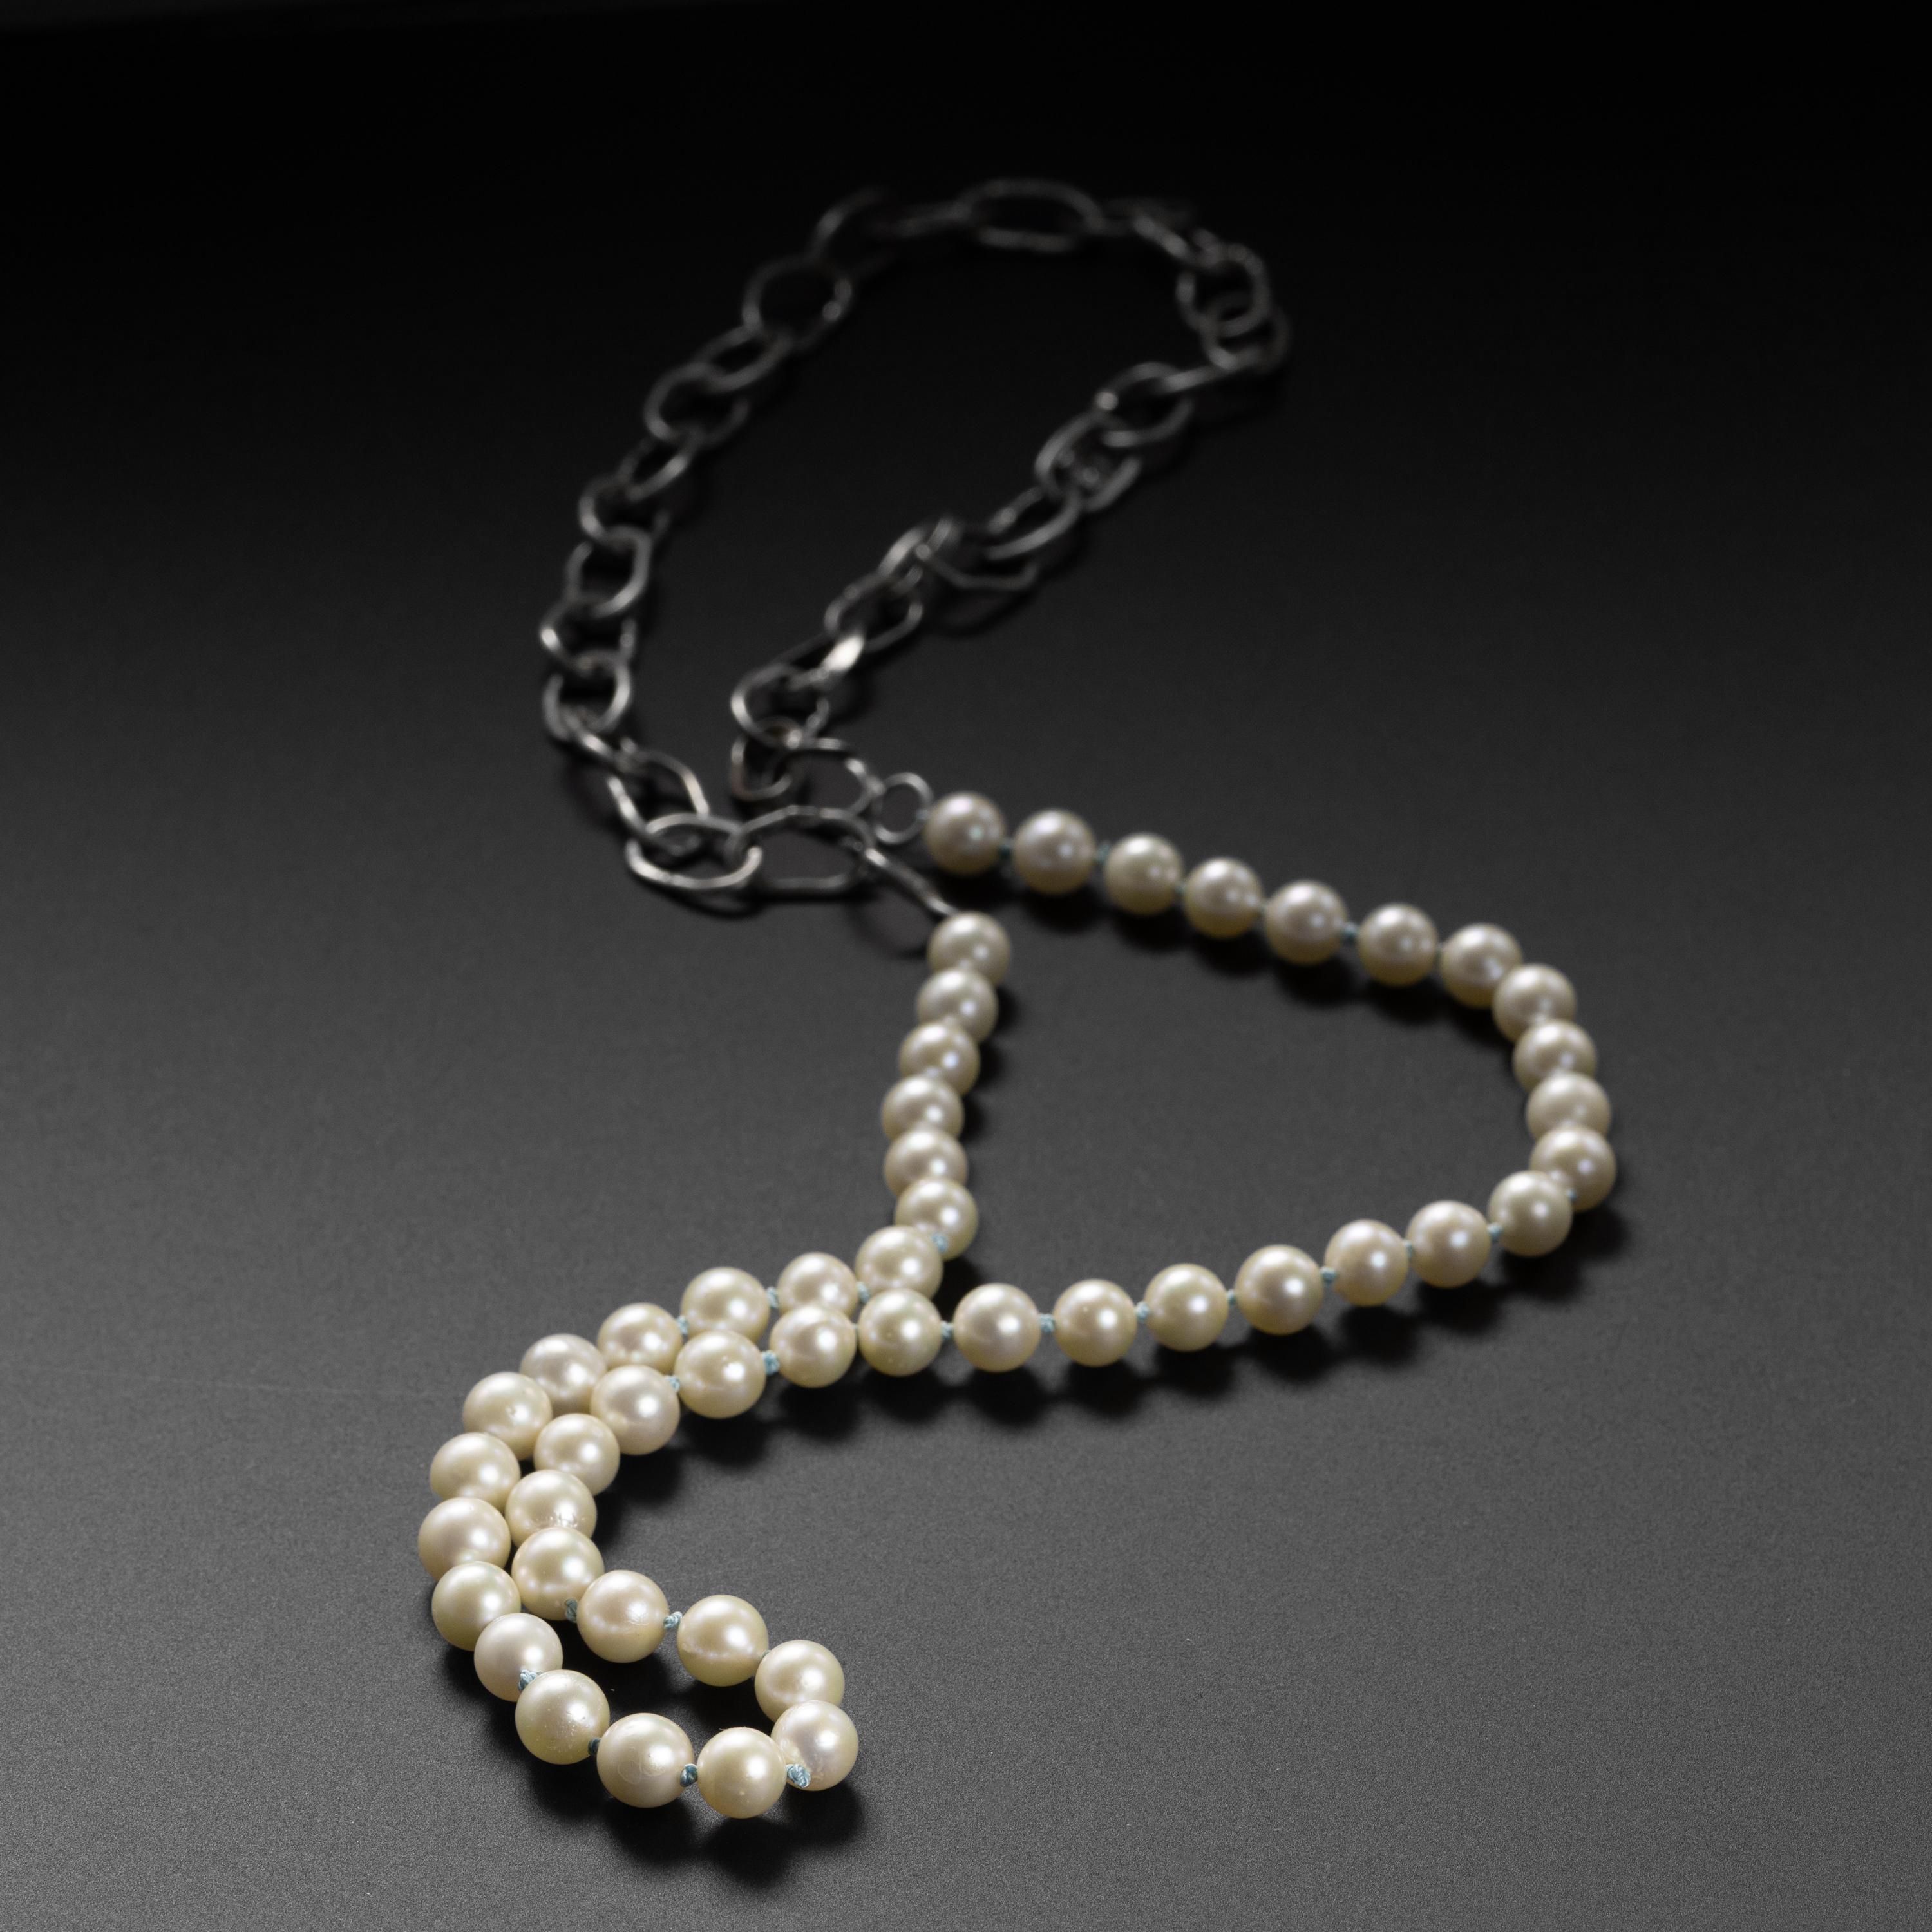 Old European Cut Unisex Akoya Pearl & Chain Necklace with Diamond New For Sale